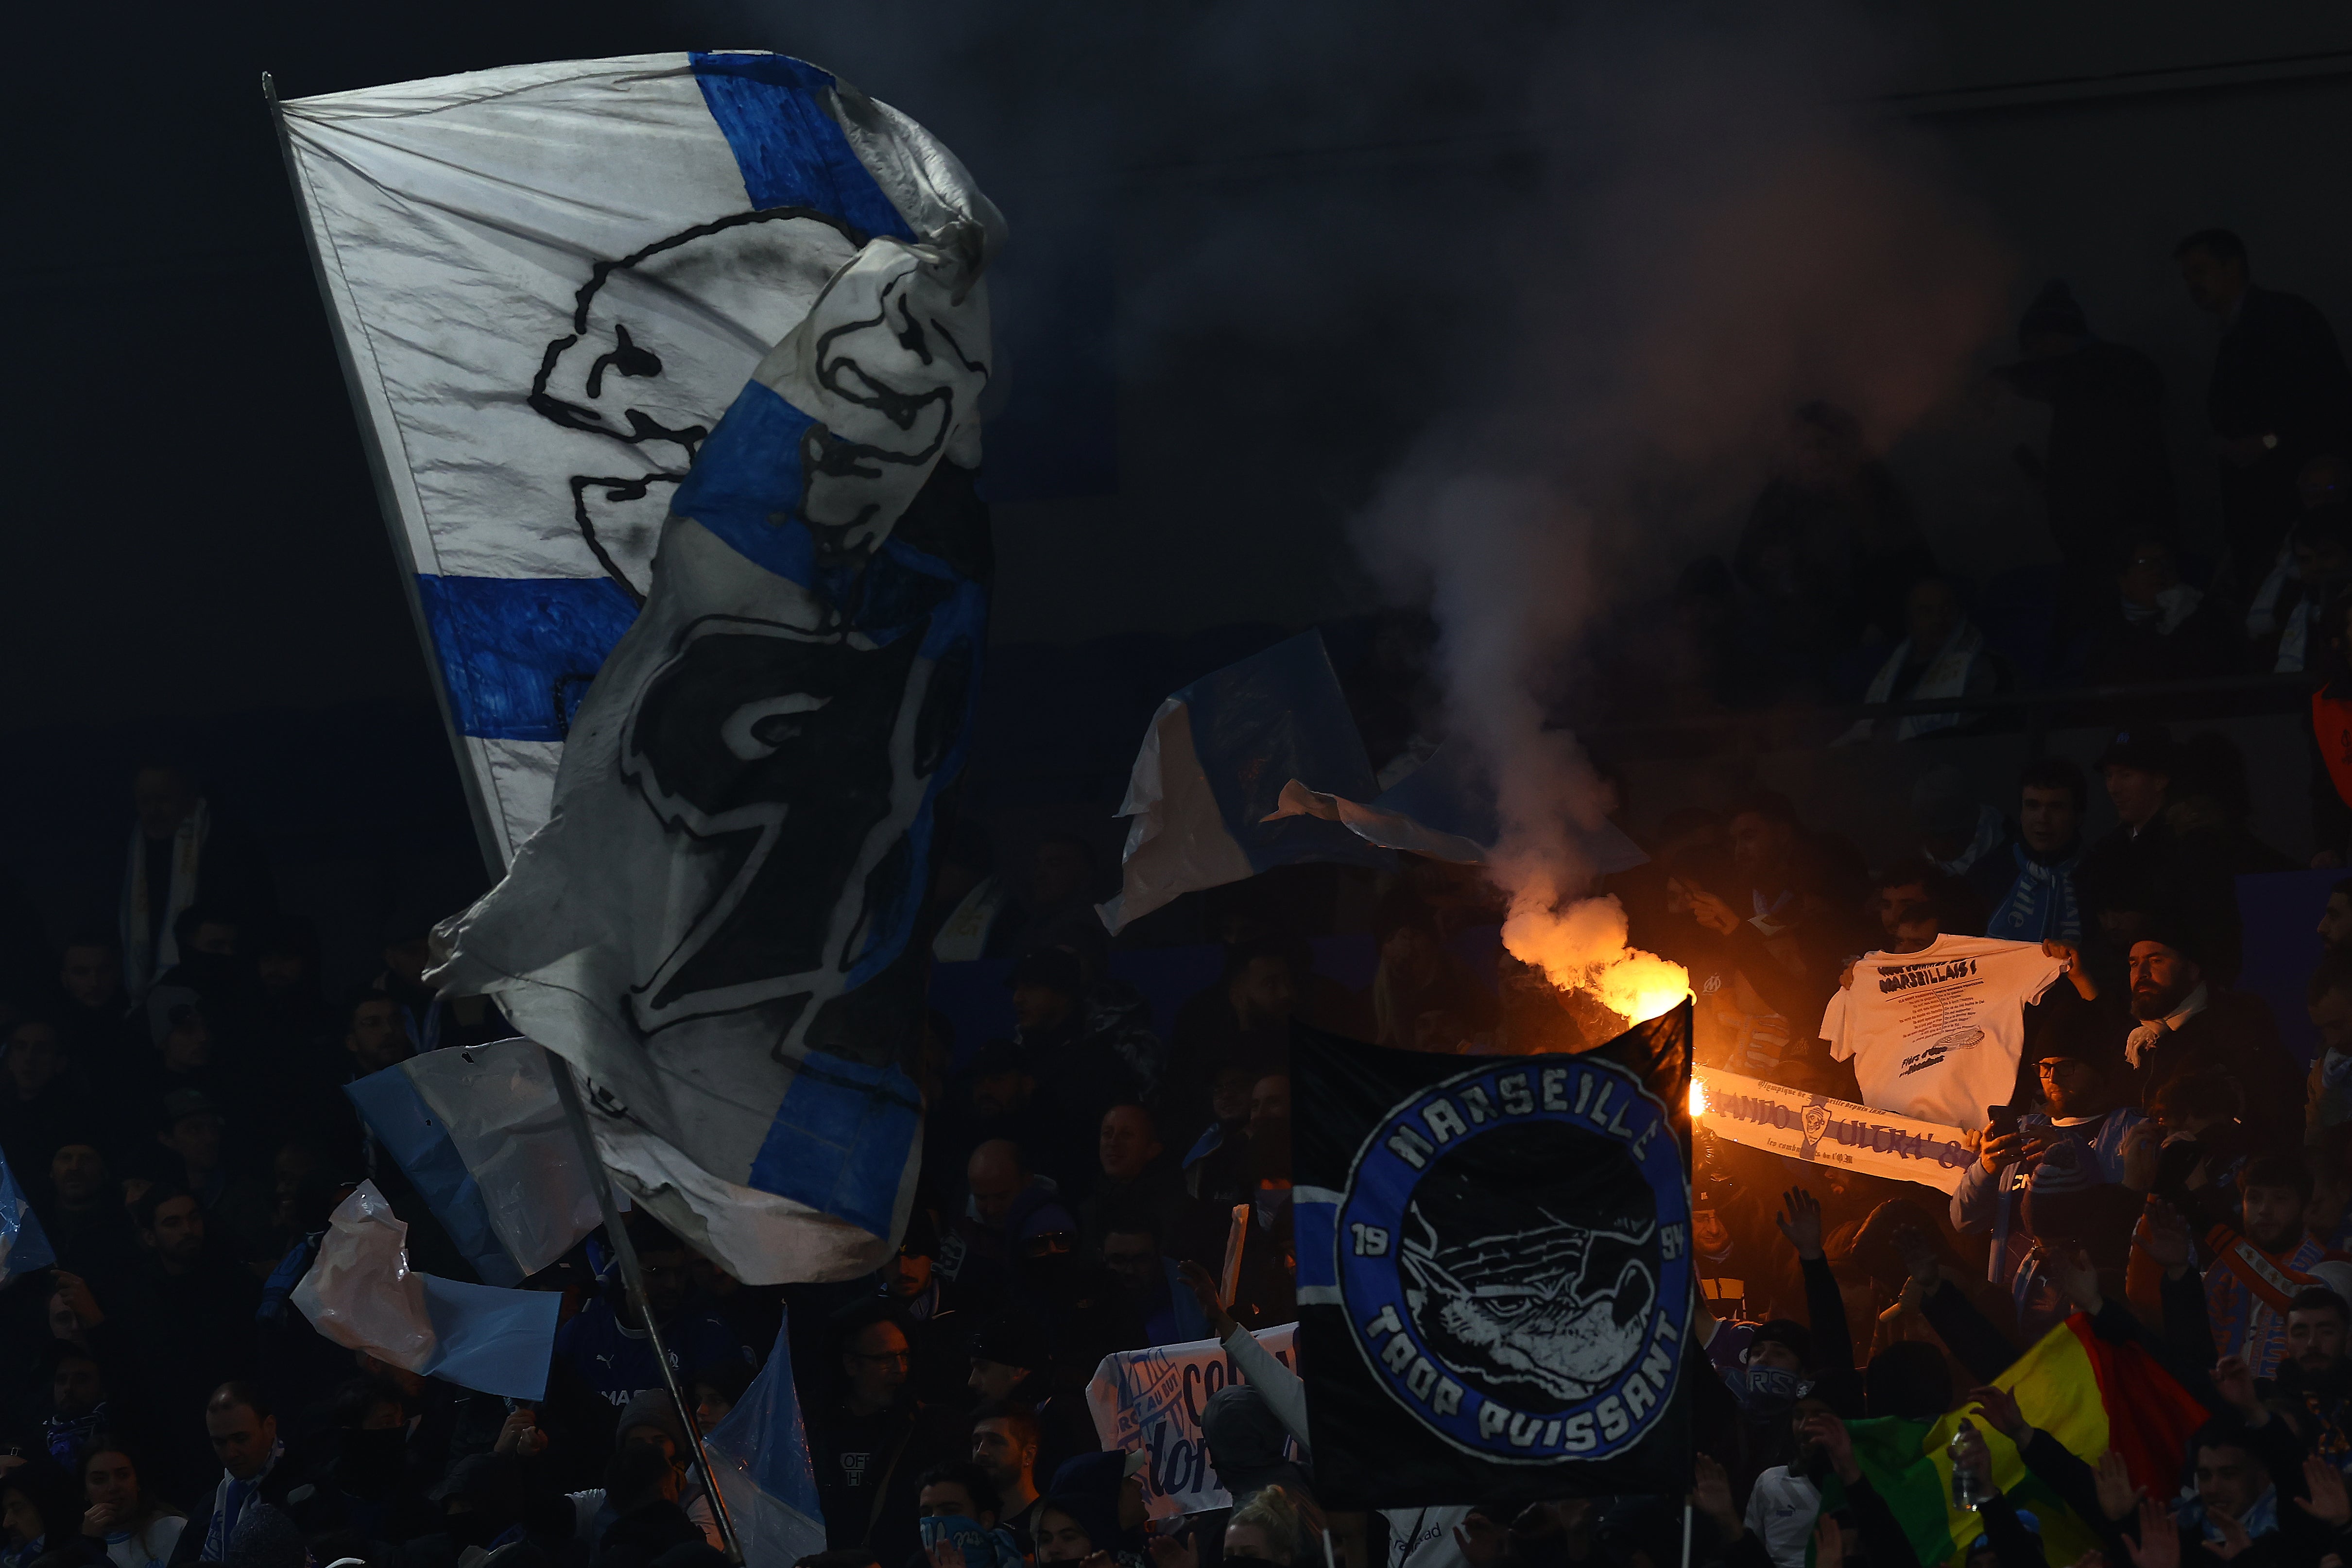 Marseille fans have had their allocation for the upcoming match against Benfica cancelled